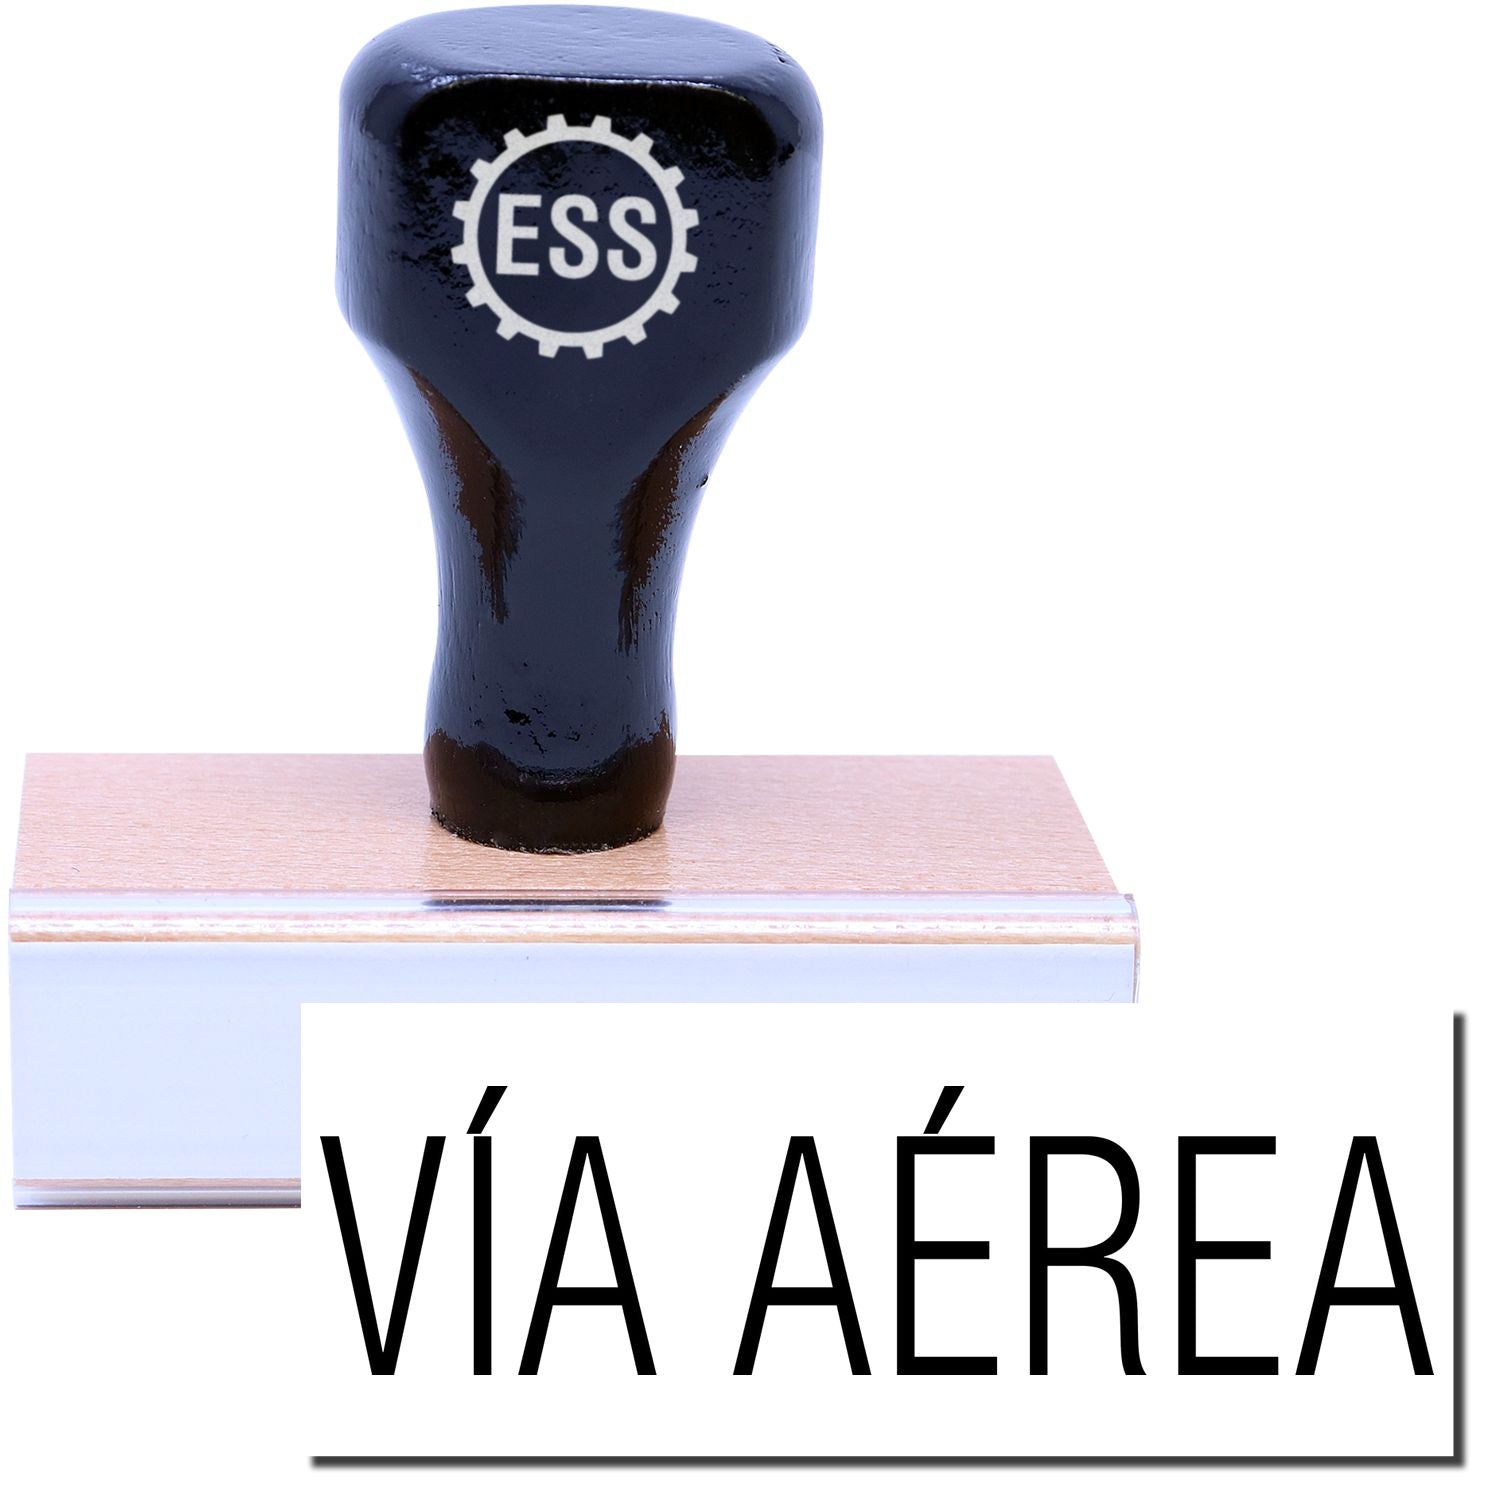 A stock office rubber stamp with a stamped image showing how the text "VIA AEREA" is displayed after stamping.